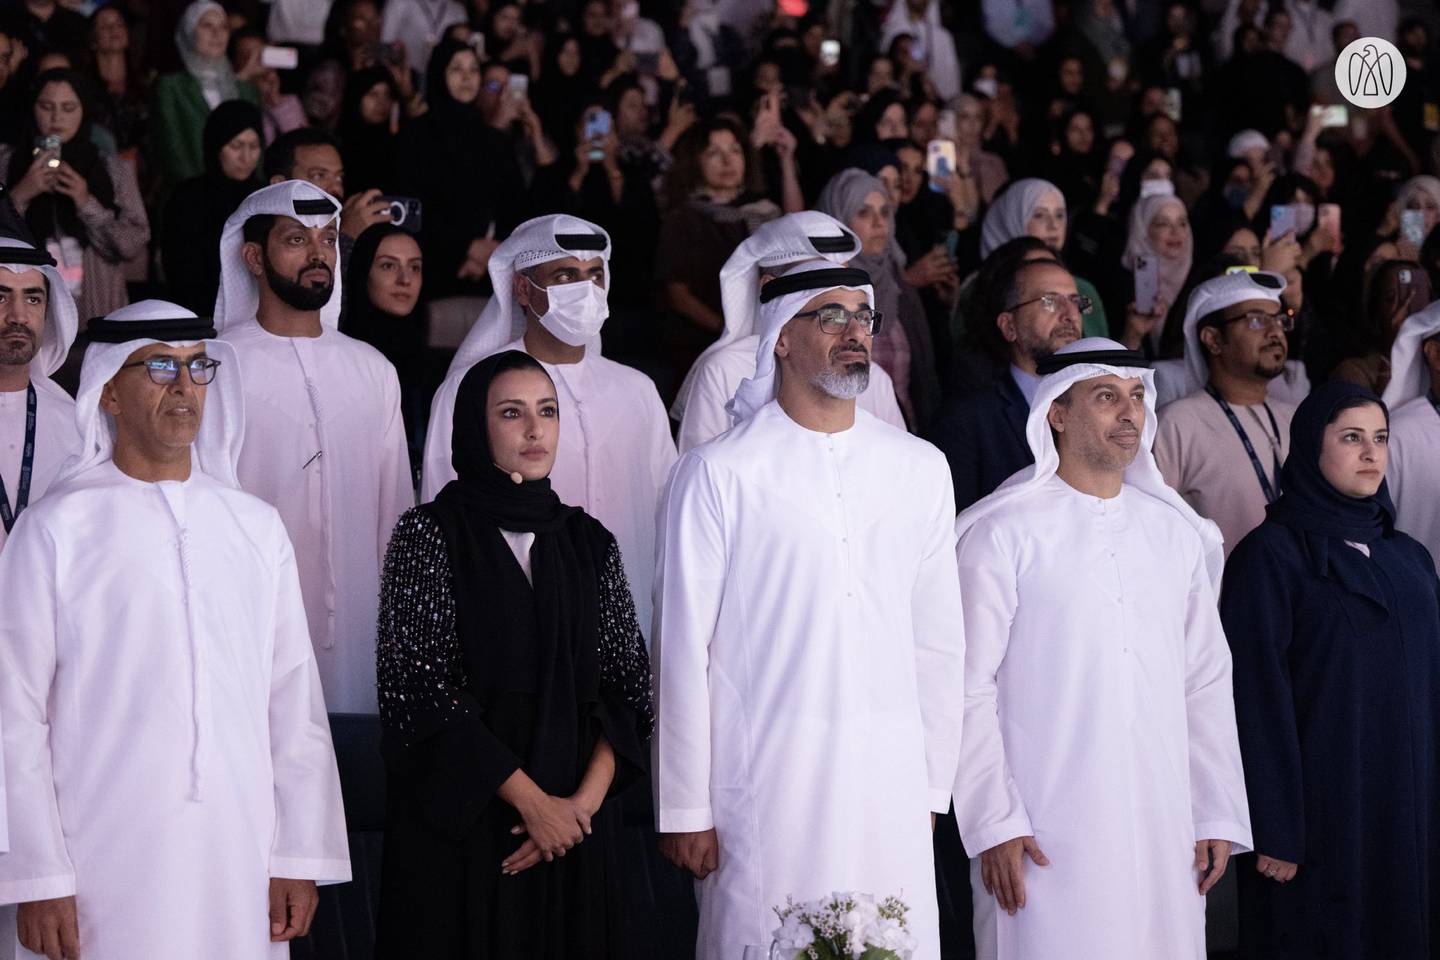 Sheikh Khaled bin Mohamed, chairman of the Abu Dhabi Executive Office and member of the Abu Dhabi Executive Council, with Dr Mugheer Al Khaili, chairman of the Department of Community Development; Sara Musallam, Minister of State for Early Education and chairperson of the Federal Authority for Early Education; and Dr Ahmad Al Falasi, Minister of Education; and Sarah Al Amiri, Minister of State. Photo: ADMO